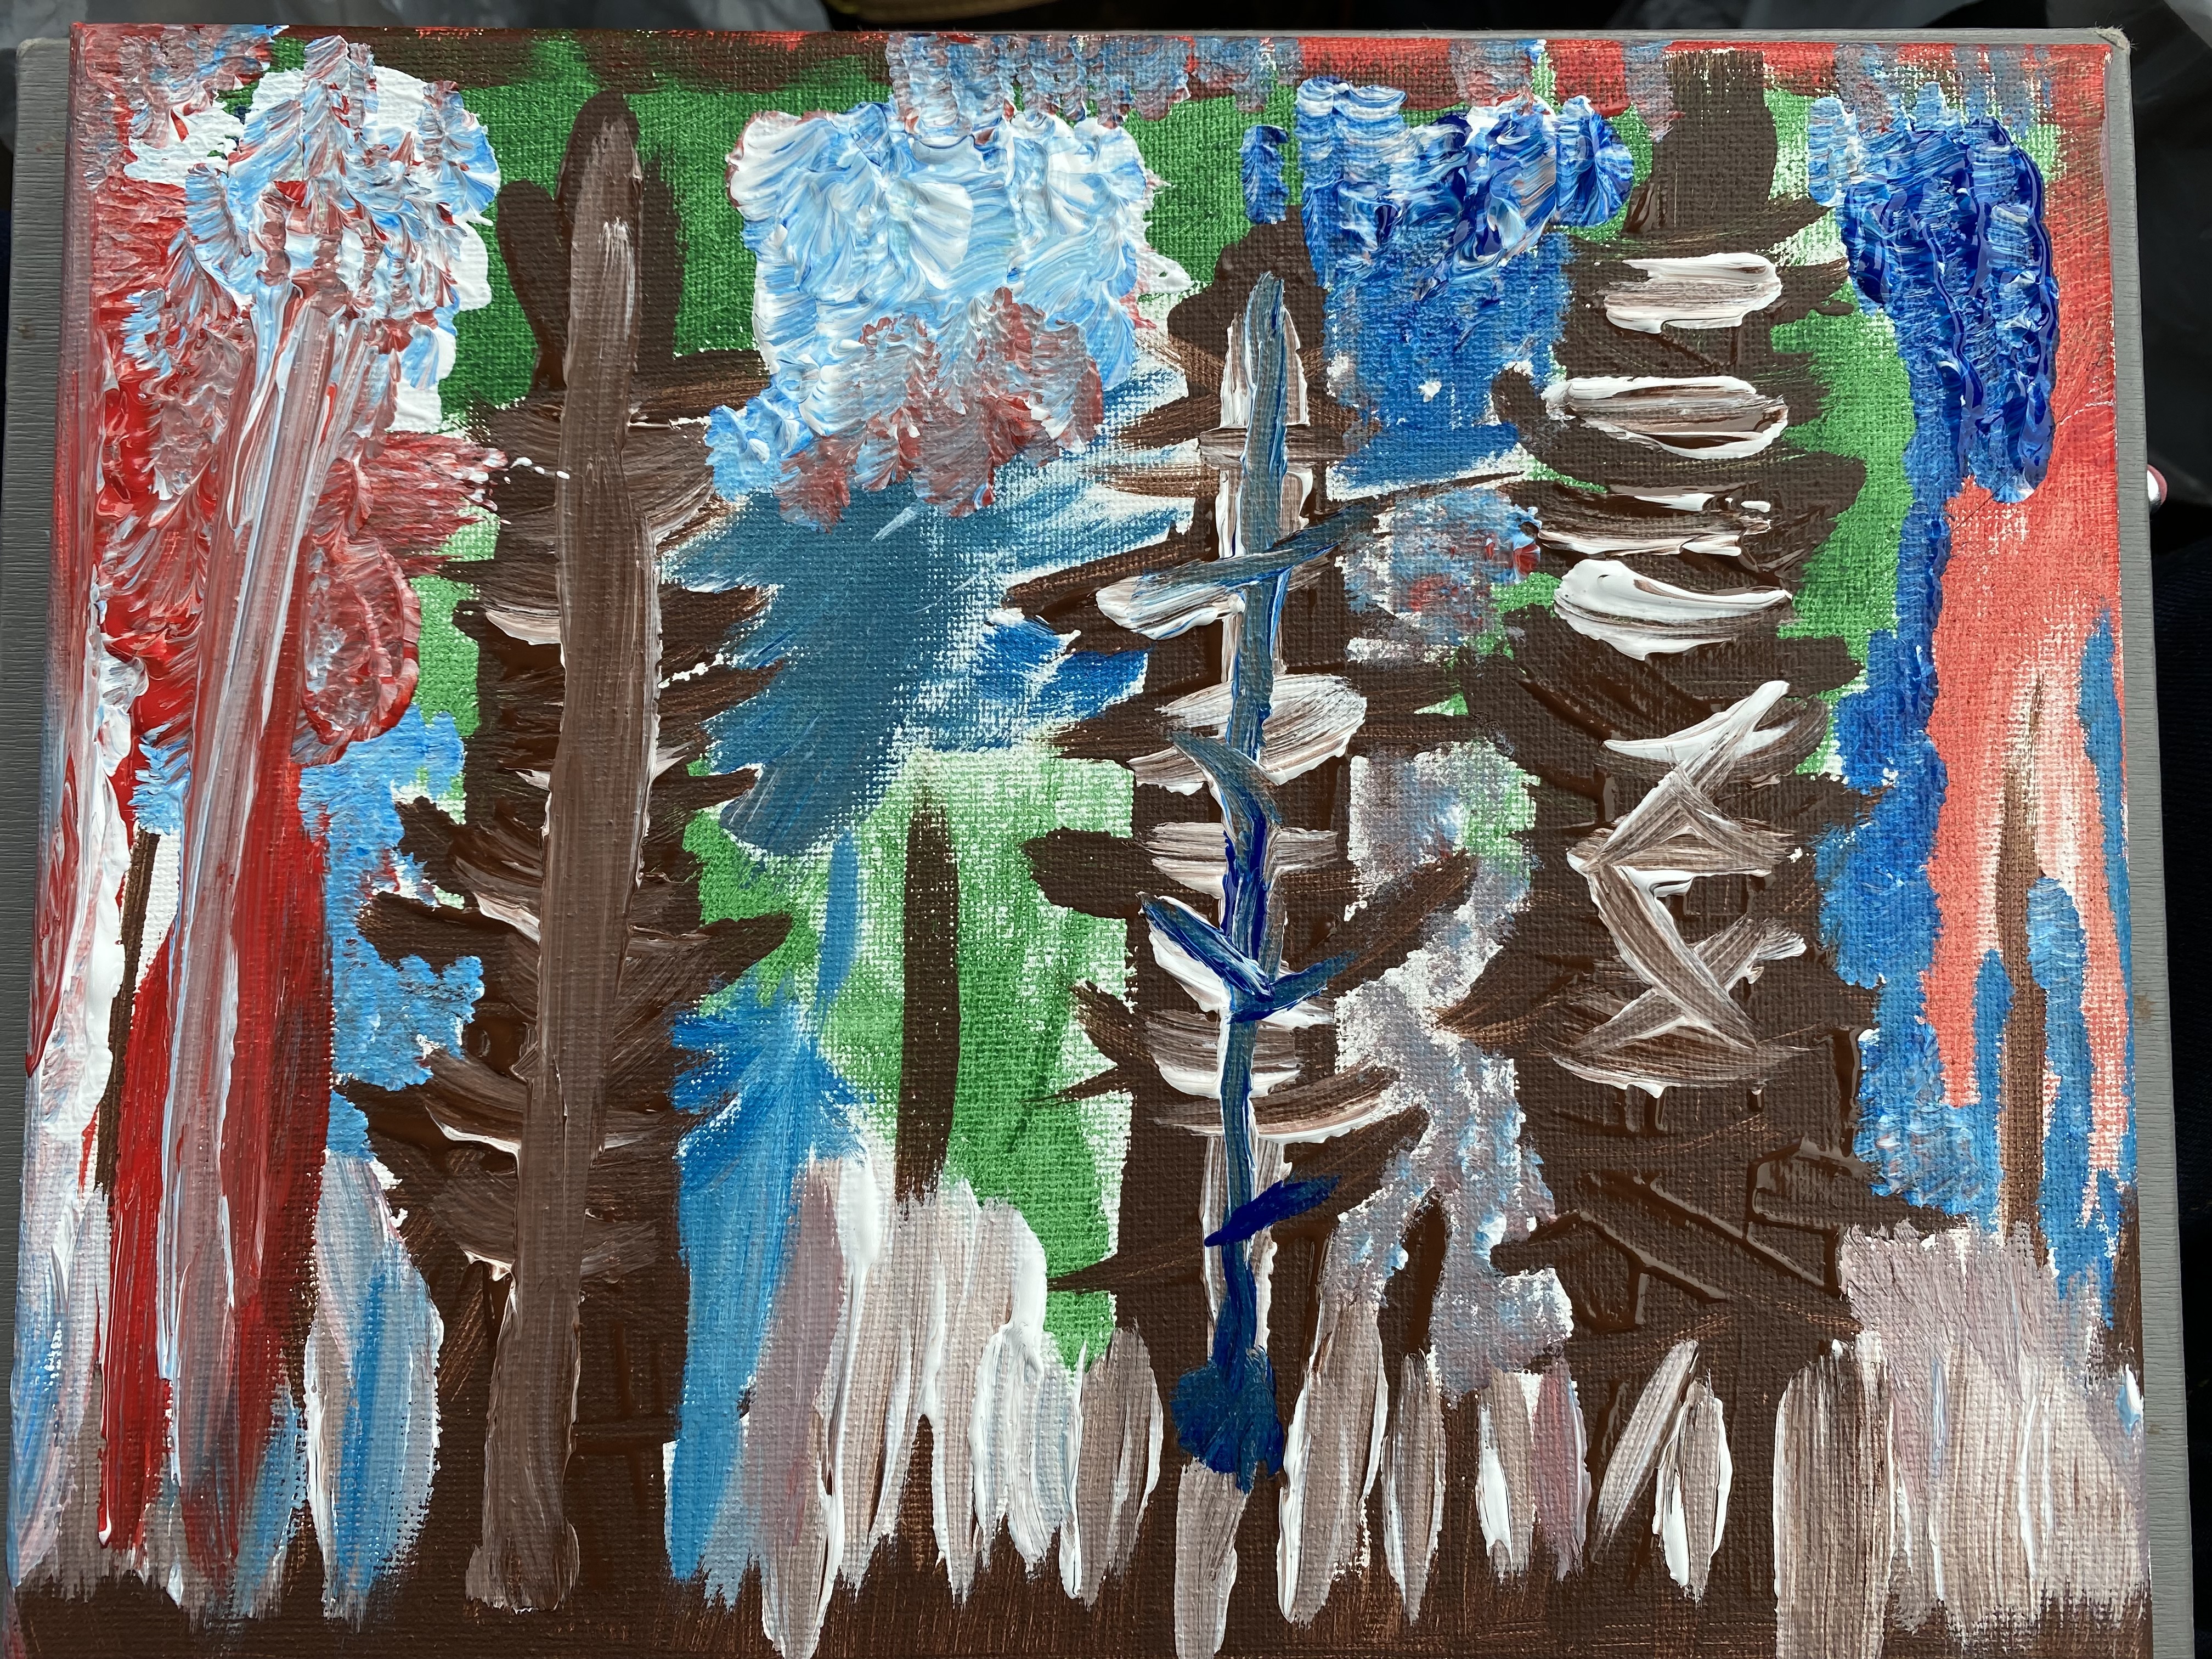 small painting made with acrylic paints, composition contains three trees. the painting has hues of green, brown, white, light blue, brilliant blue, and red. 